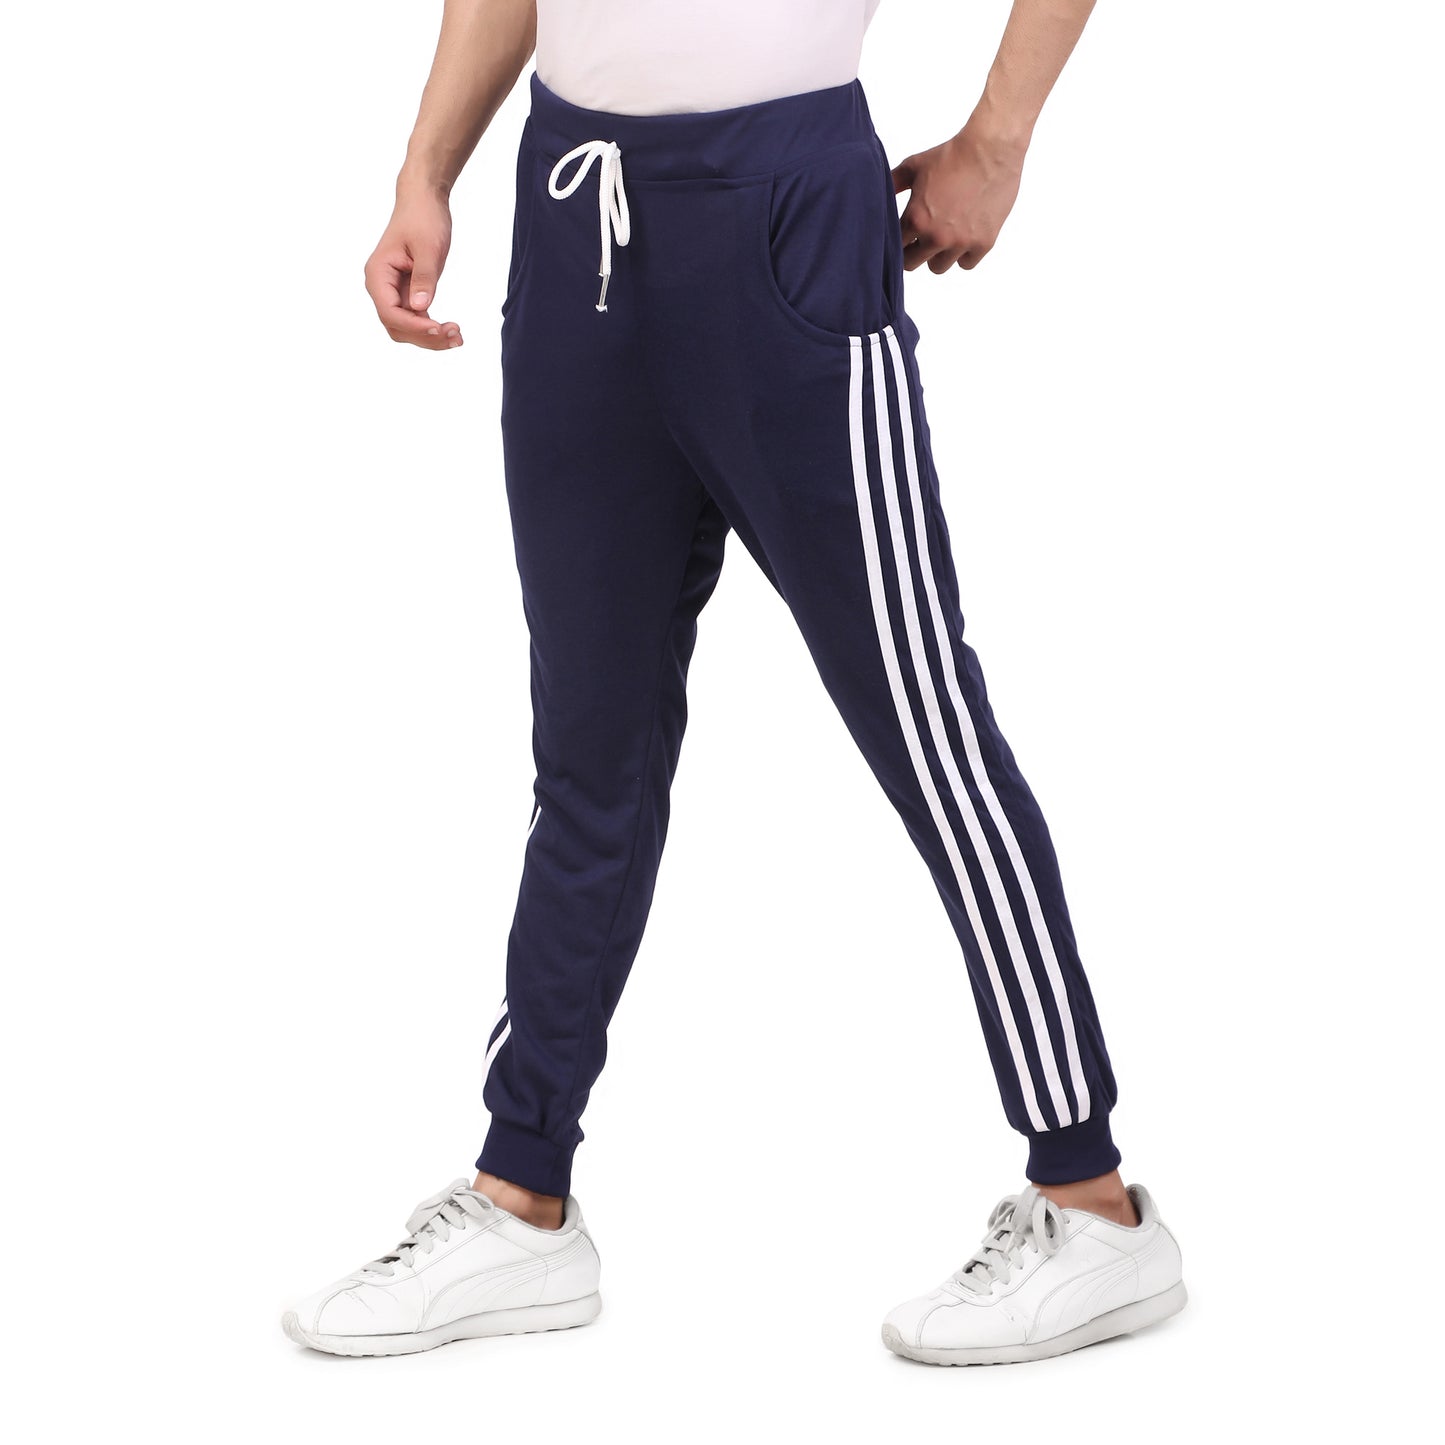 Men's Casual Solid Track Pants Navy Blue